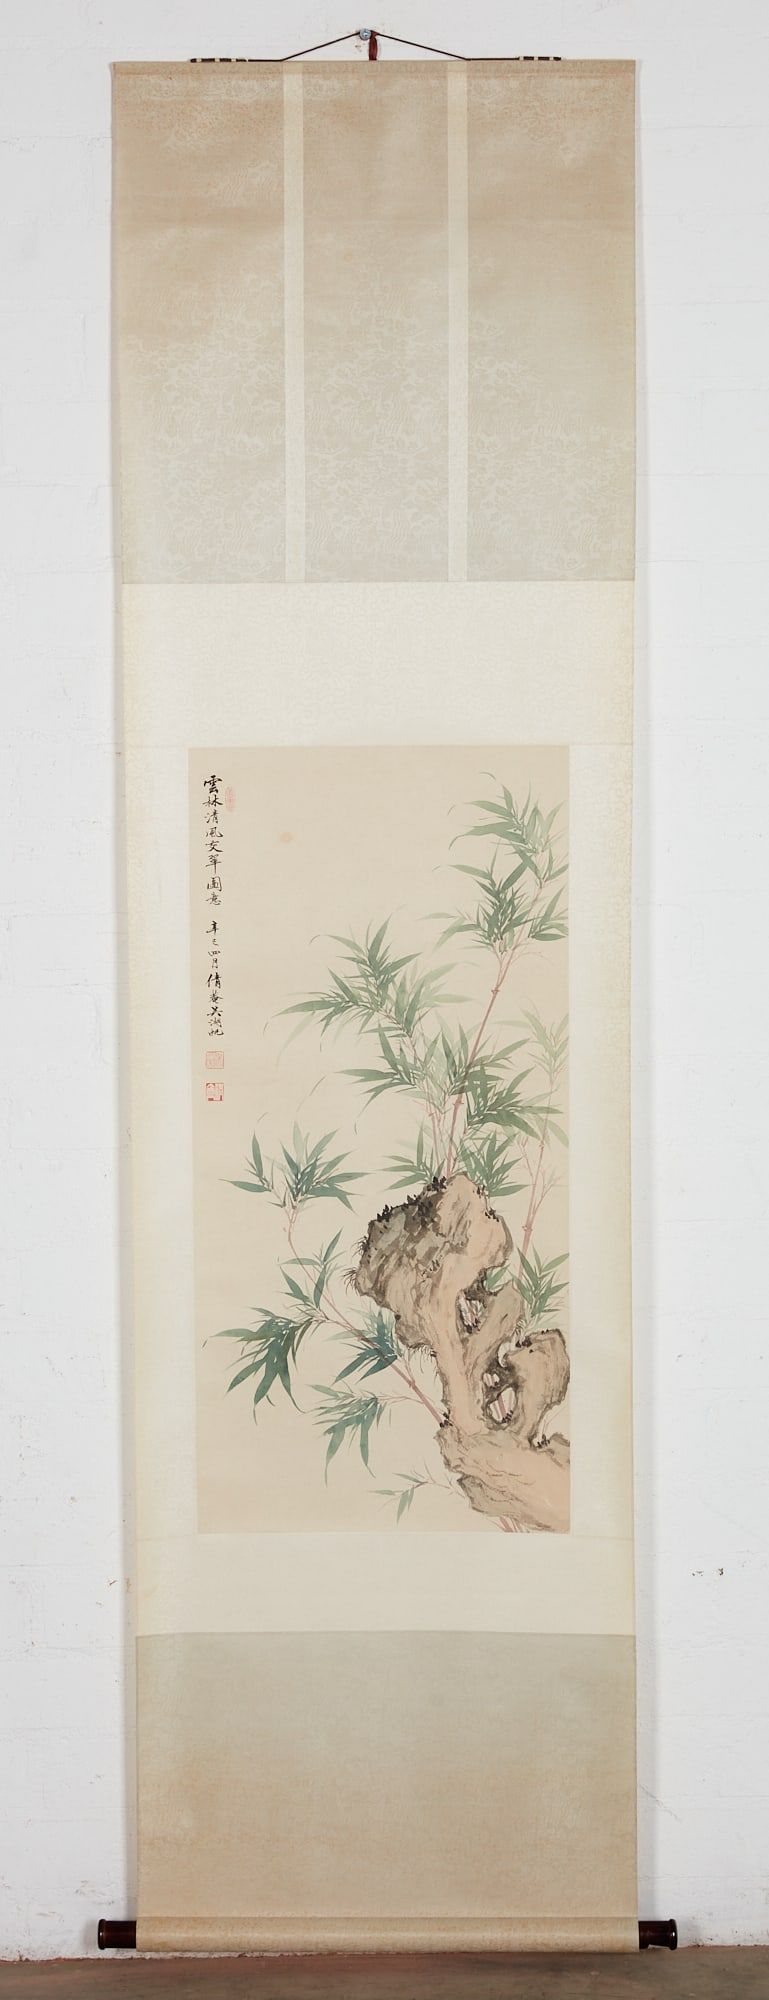 A CHINESE SCROLL DEPICTING BAMBOO 2fb3e29